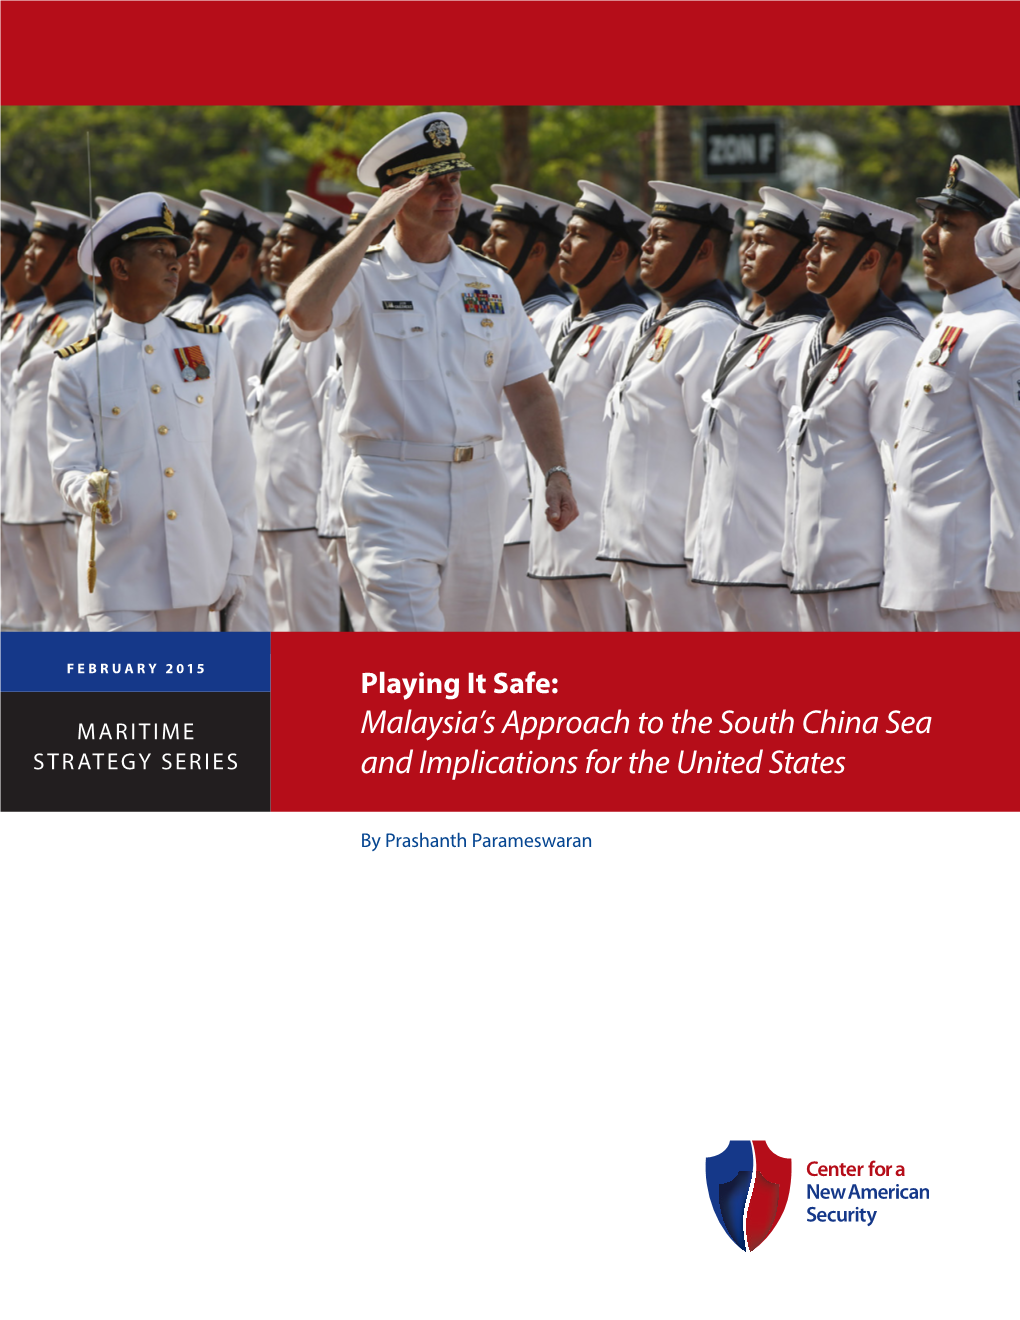 Playing It Safe: Malaysia's Approach to the South China Sea And